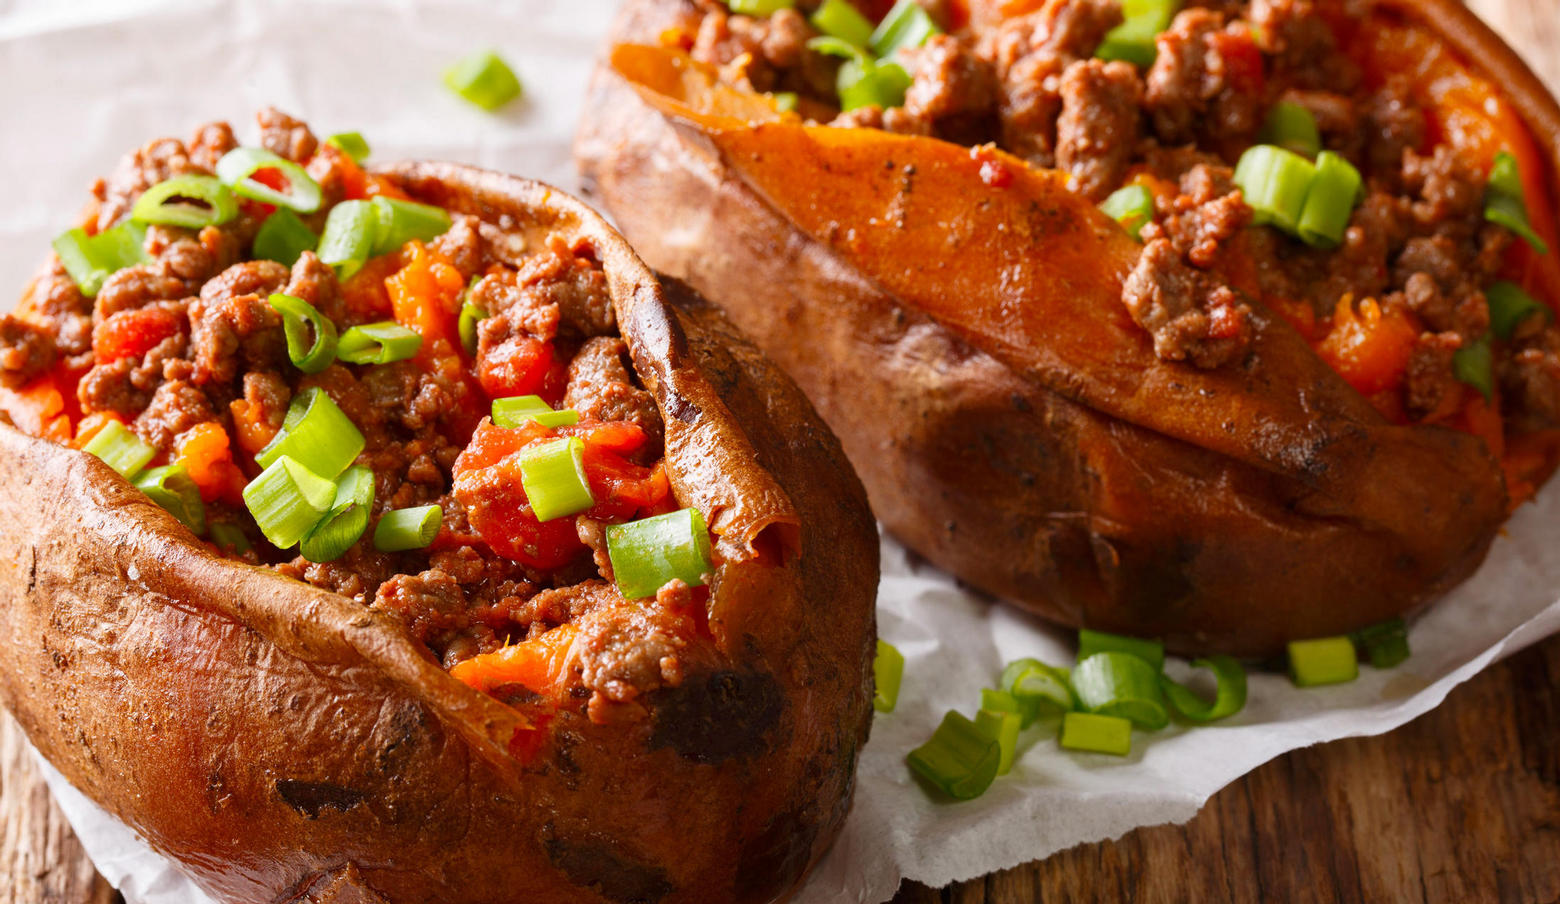 Stuffed sweet potato with chile topping